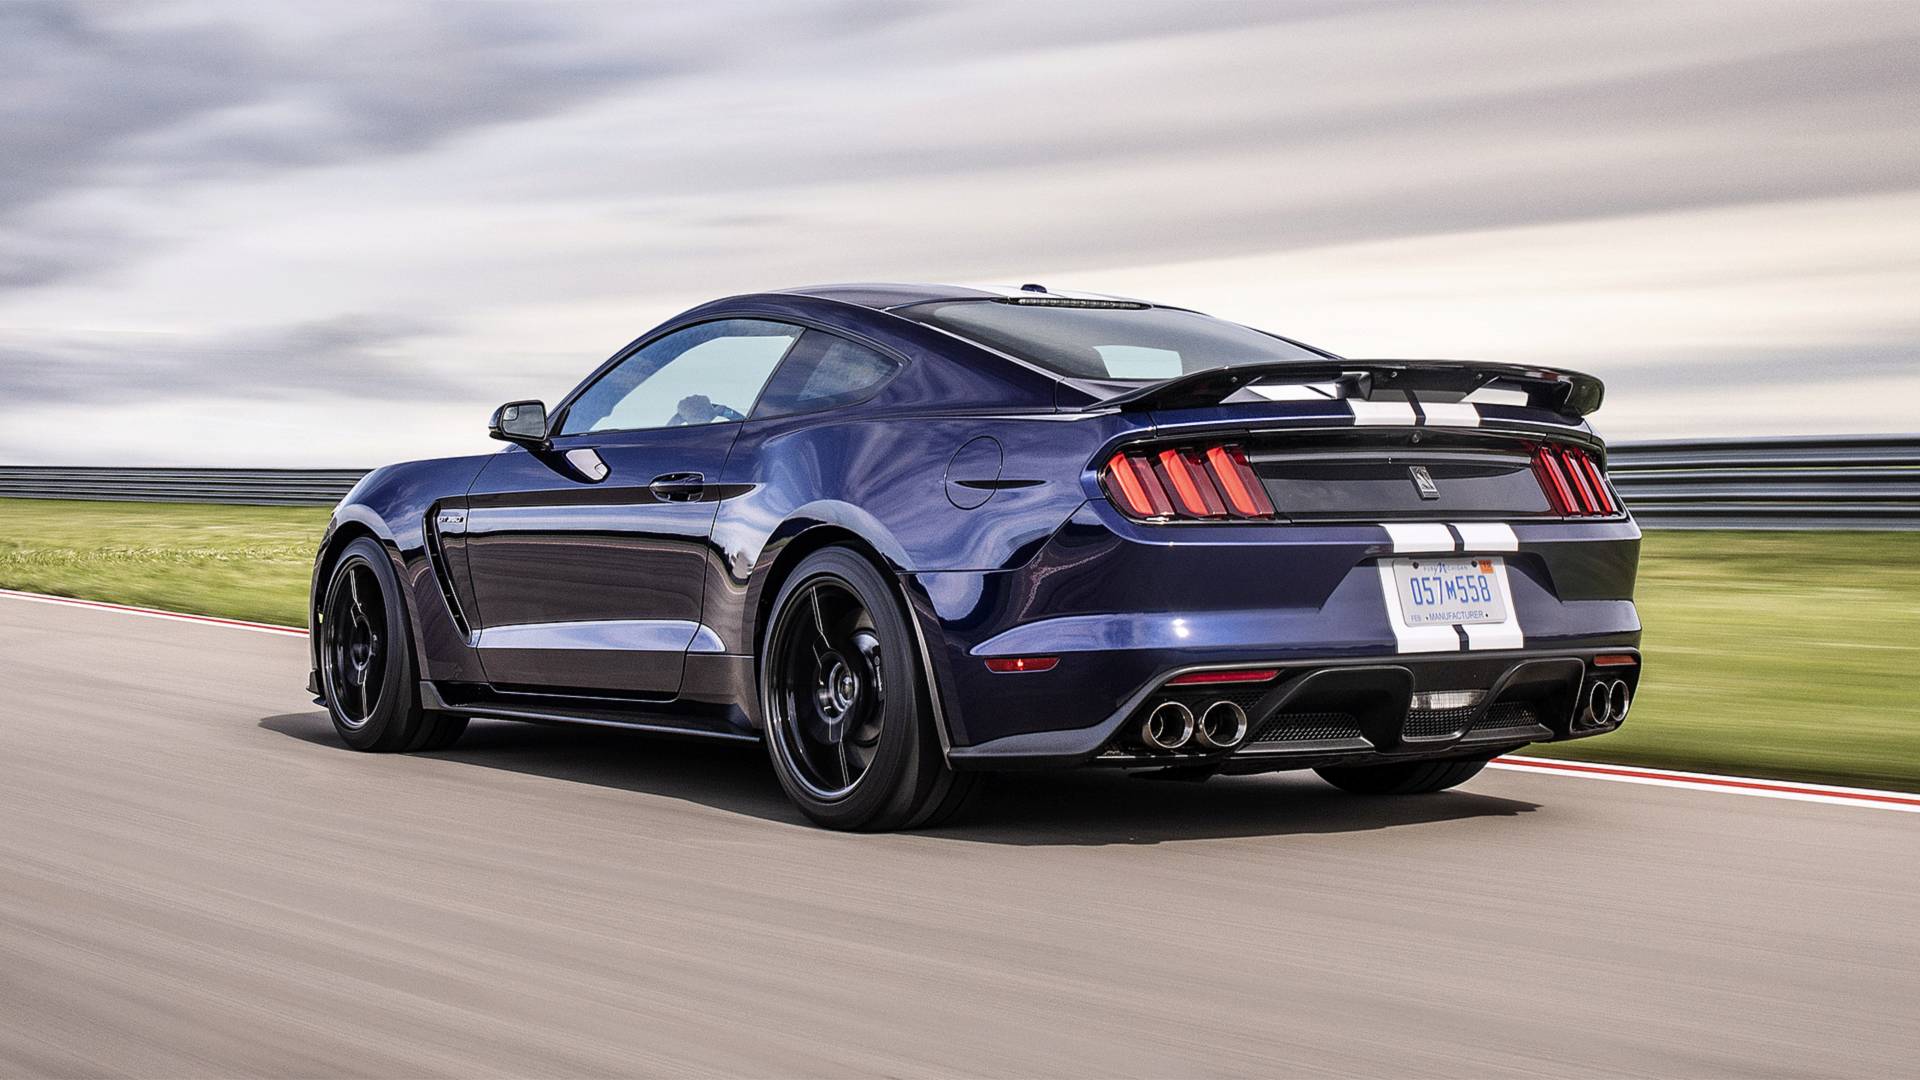 2018 Ford Mustang Shelby Gt350 Specs